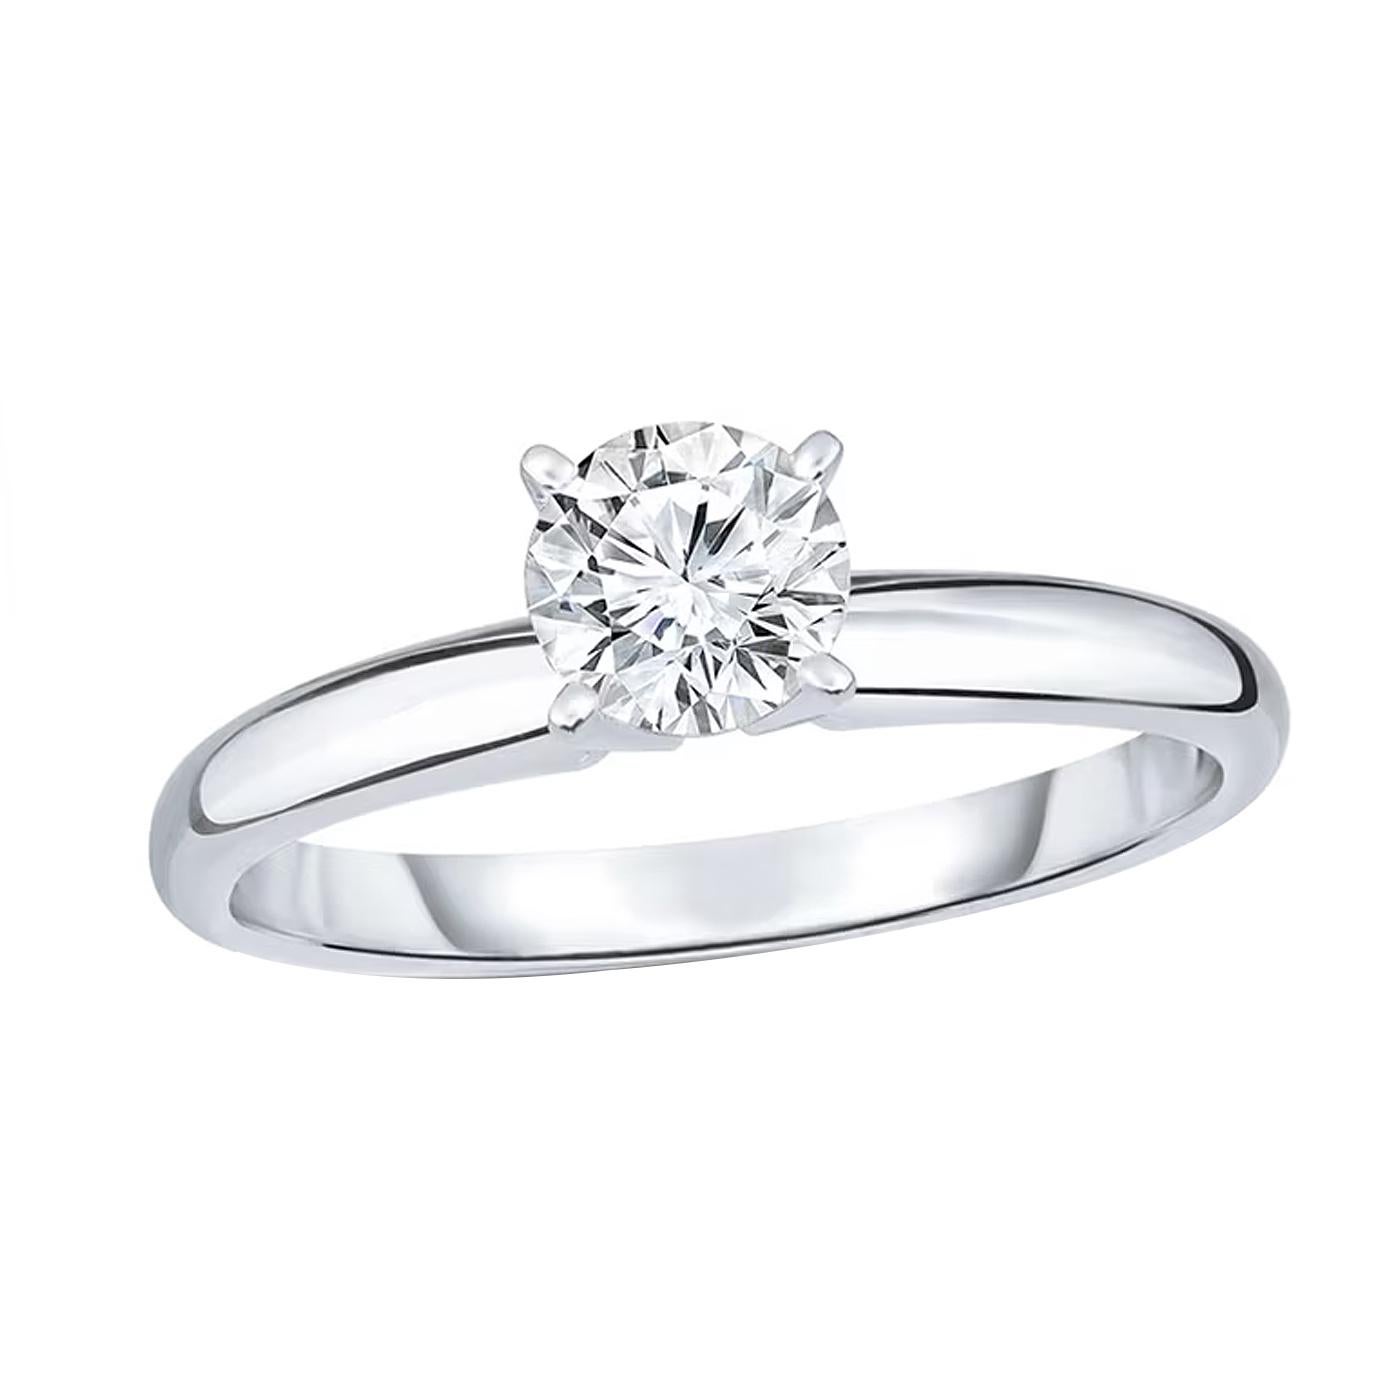 Ask for her hand with the exquisite look of this sparkling GIA-certified diamond solitaire Tiffany-style engagement ring. Crafted in 14K white gold, this singular design showcases a spectacular 2.00 ct. GIA Certified diamond solitaire - boasting a